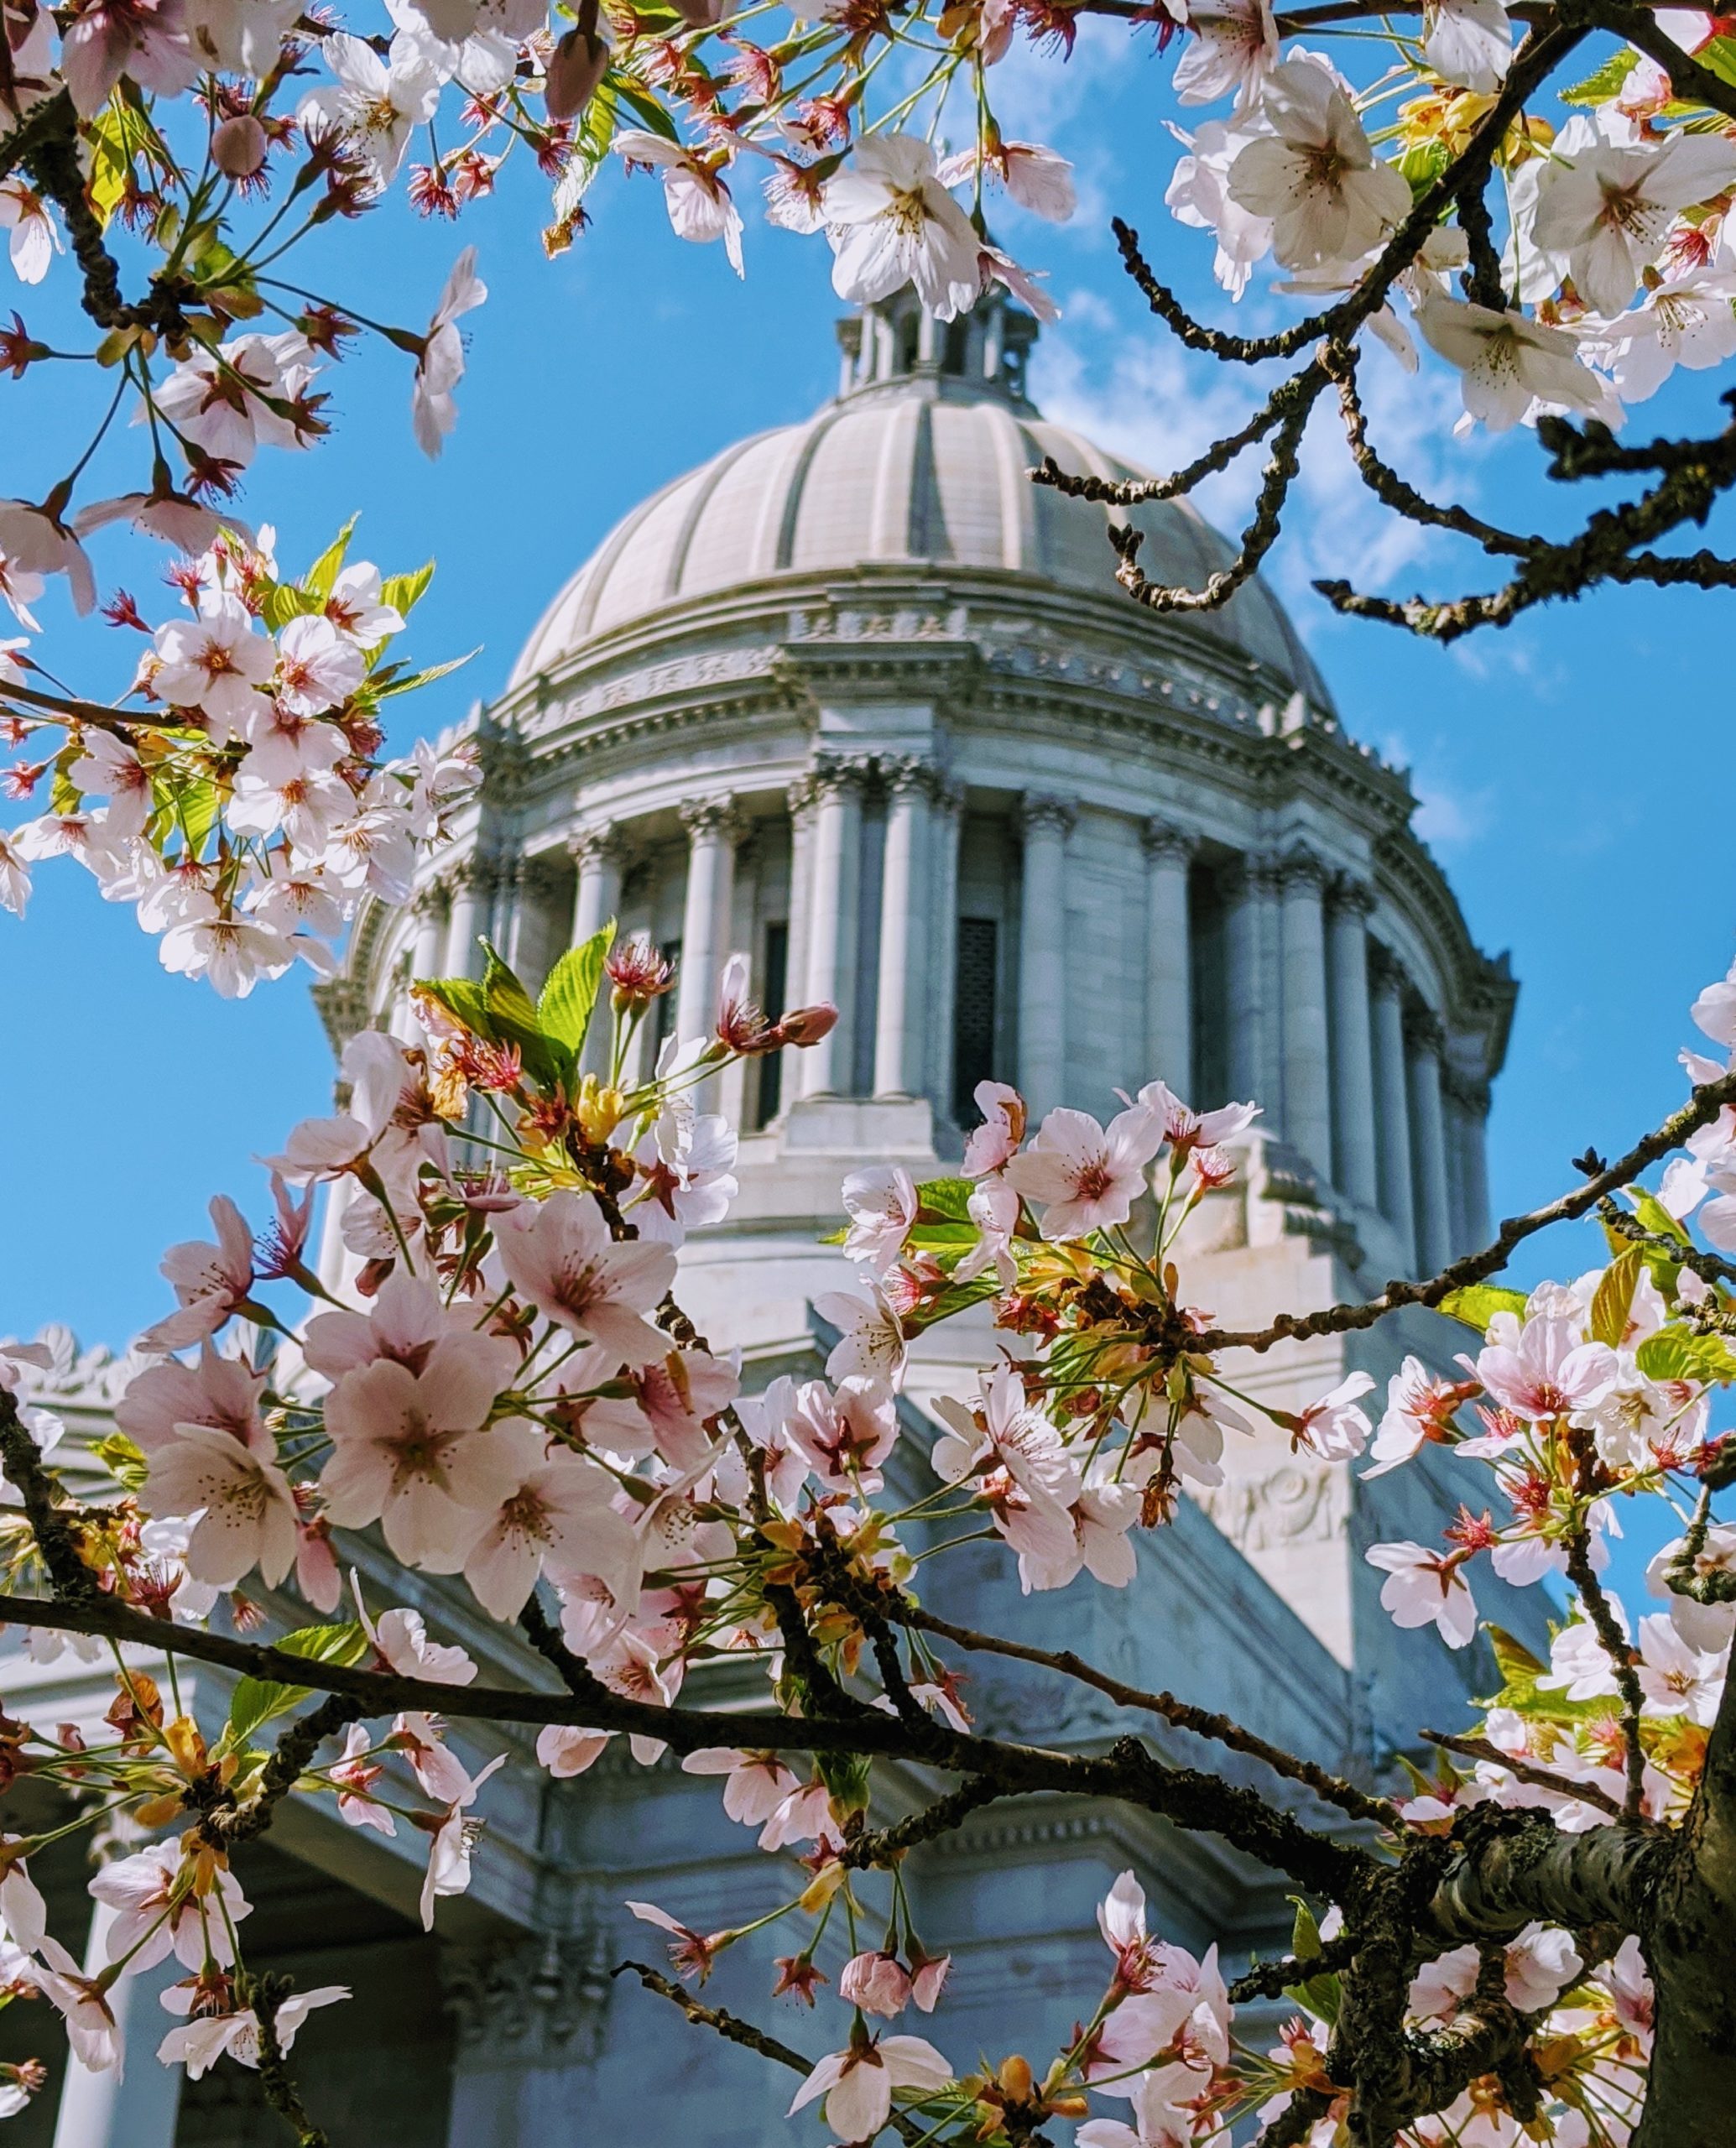 Capitol Building with Cherry Blossoms